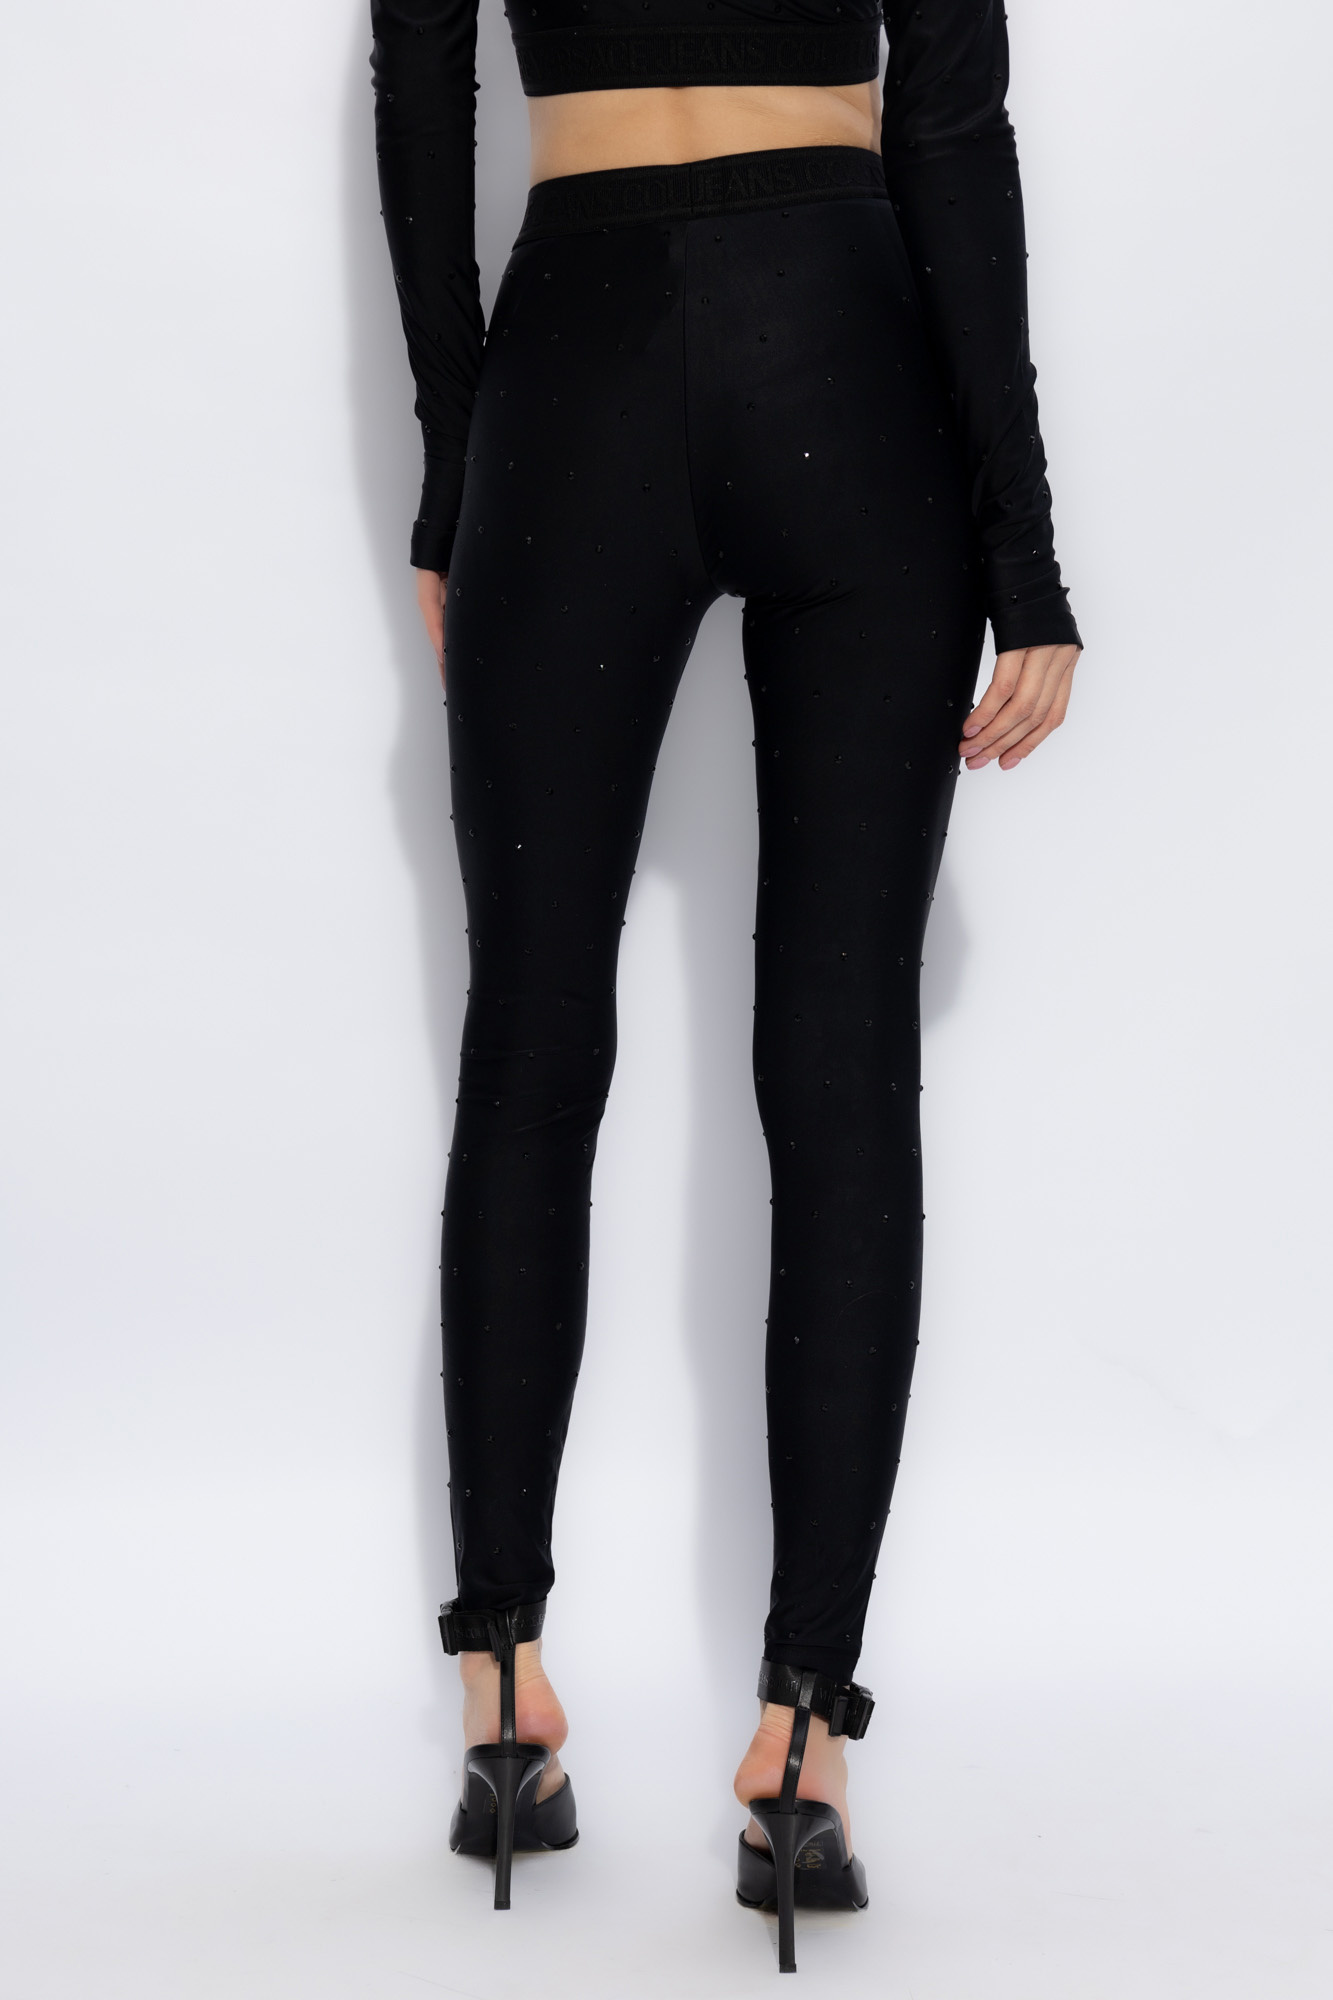 Versace Black Formal Knit Fitted Leggings / Pants Size 36 For Sale